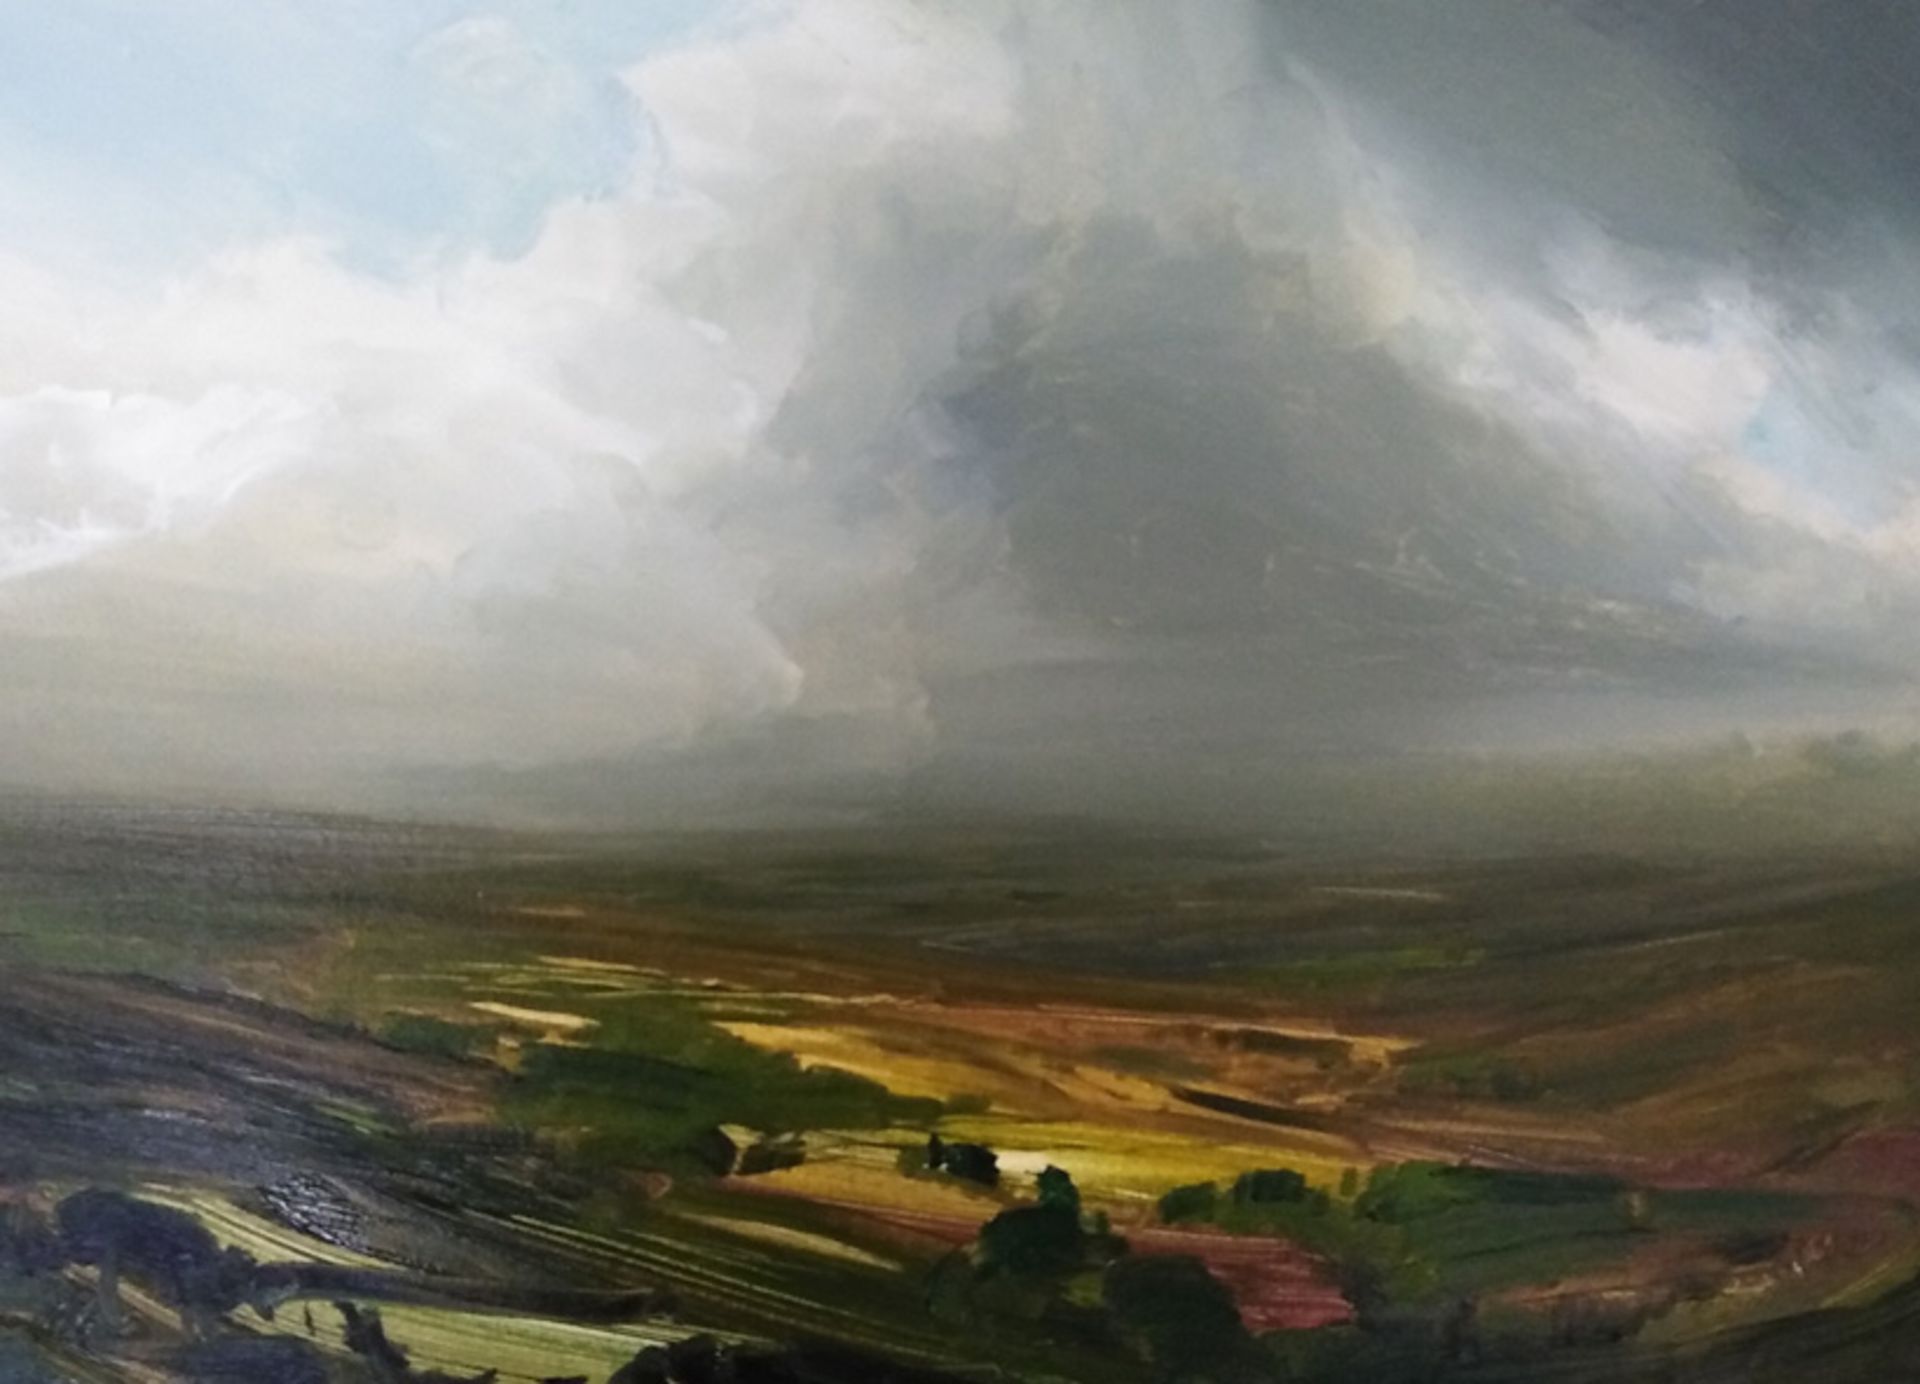 'Clouds Give Way' by James Naughton